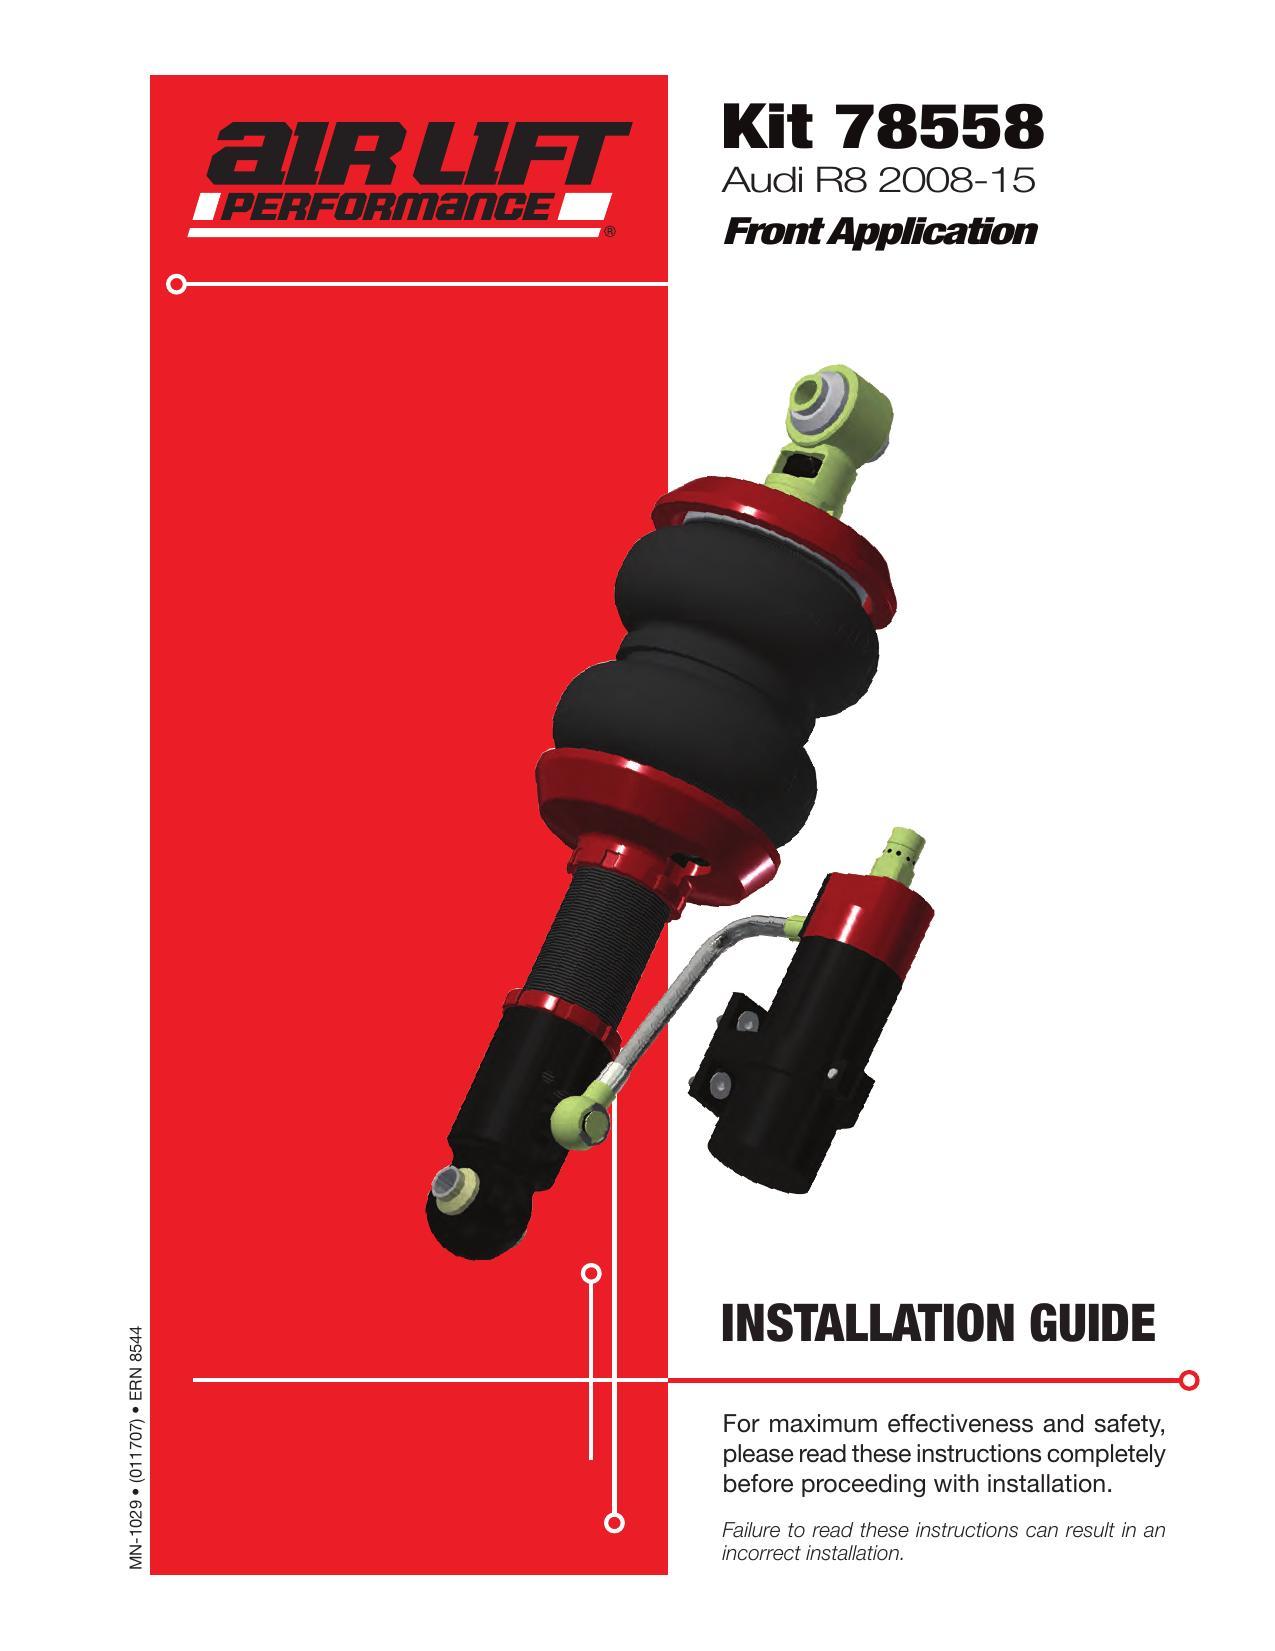 installation-guide-for-audi-r8-2008-2015-front-application.pdf